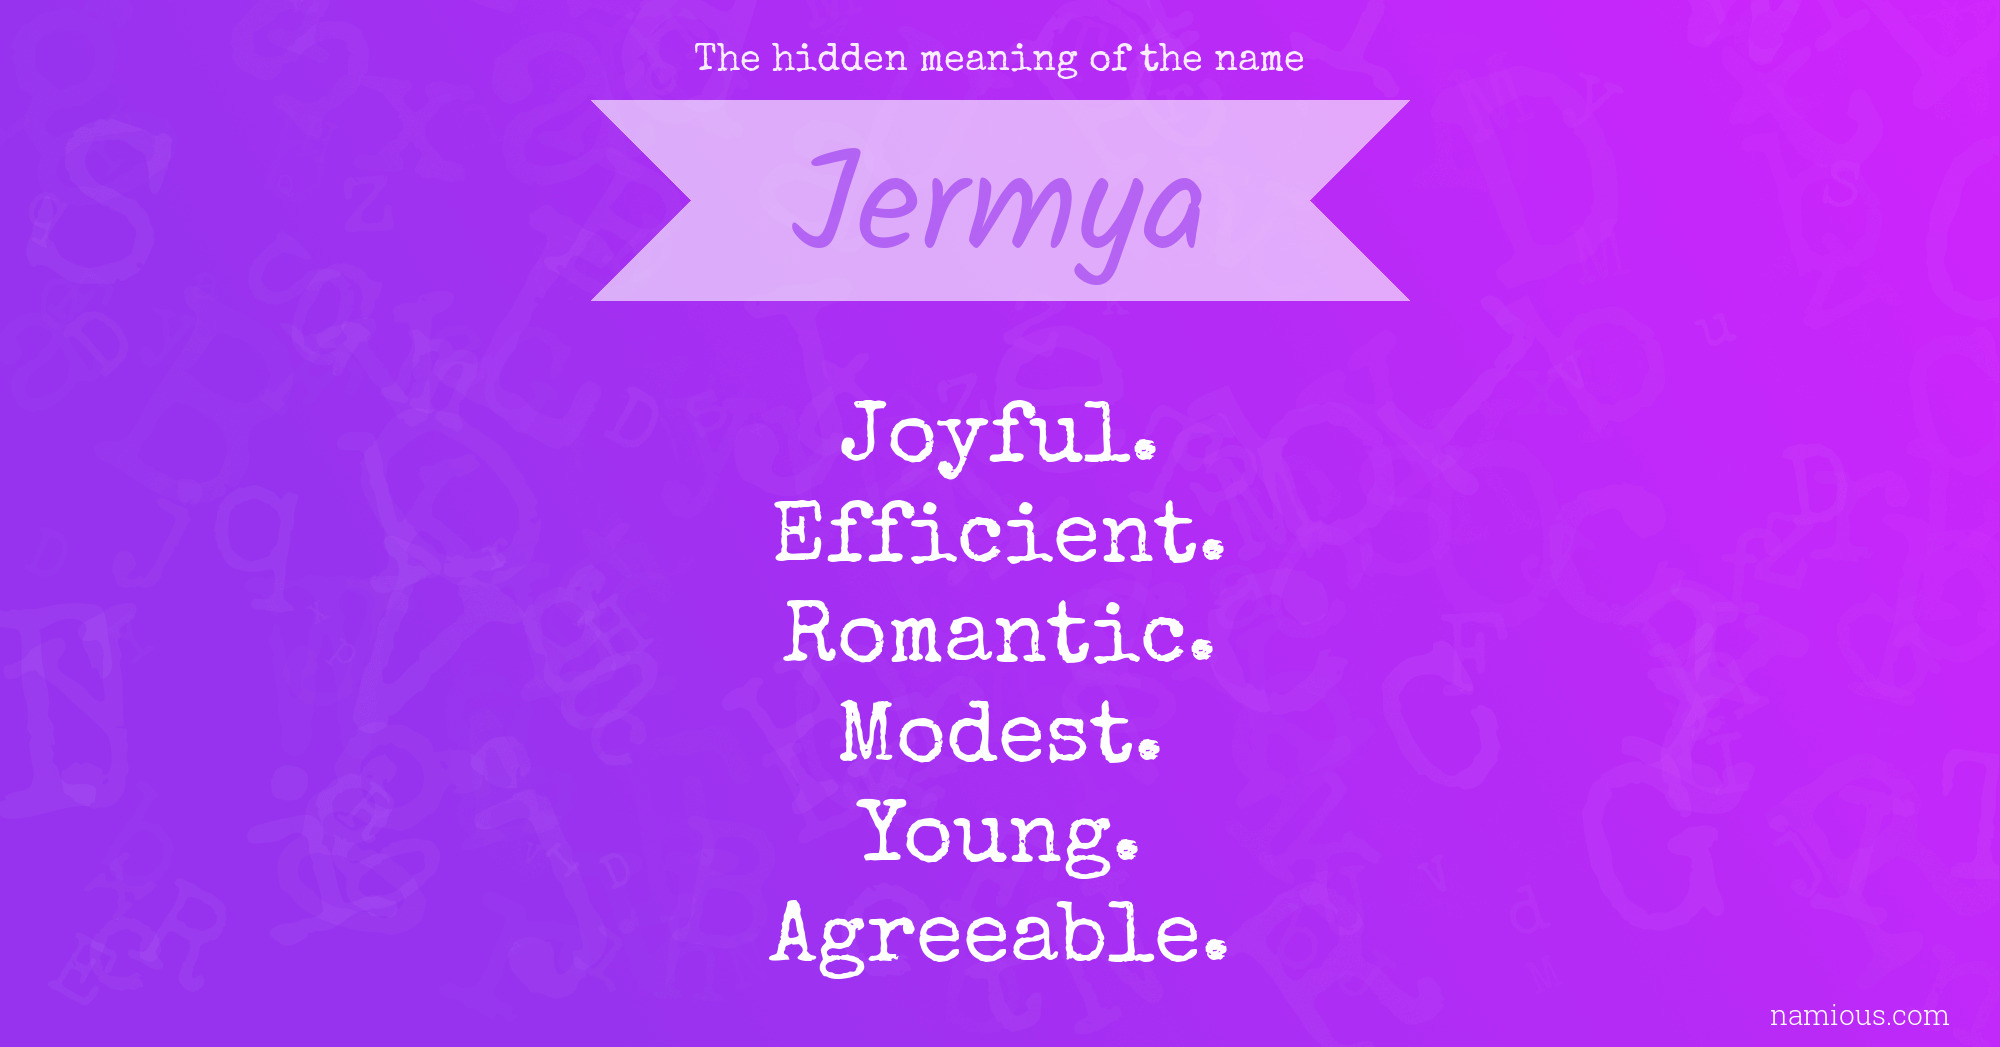 The hidden meaning of the name Jermya